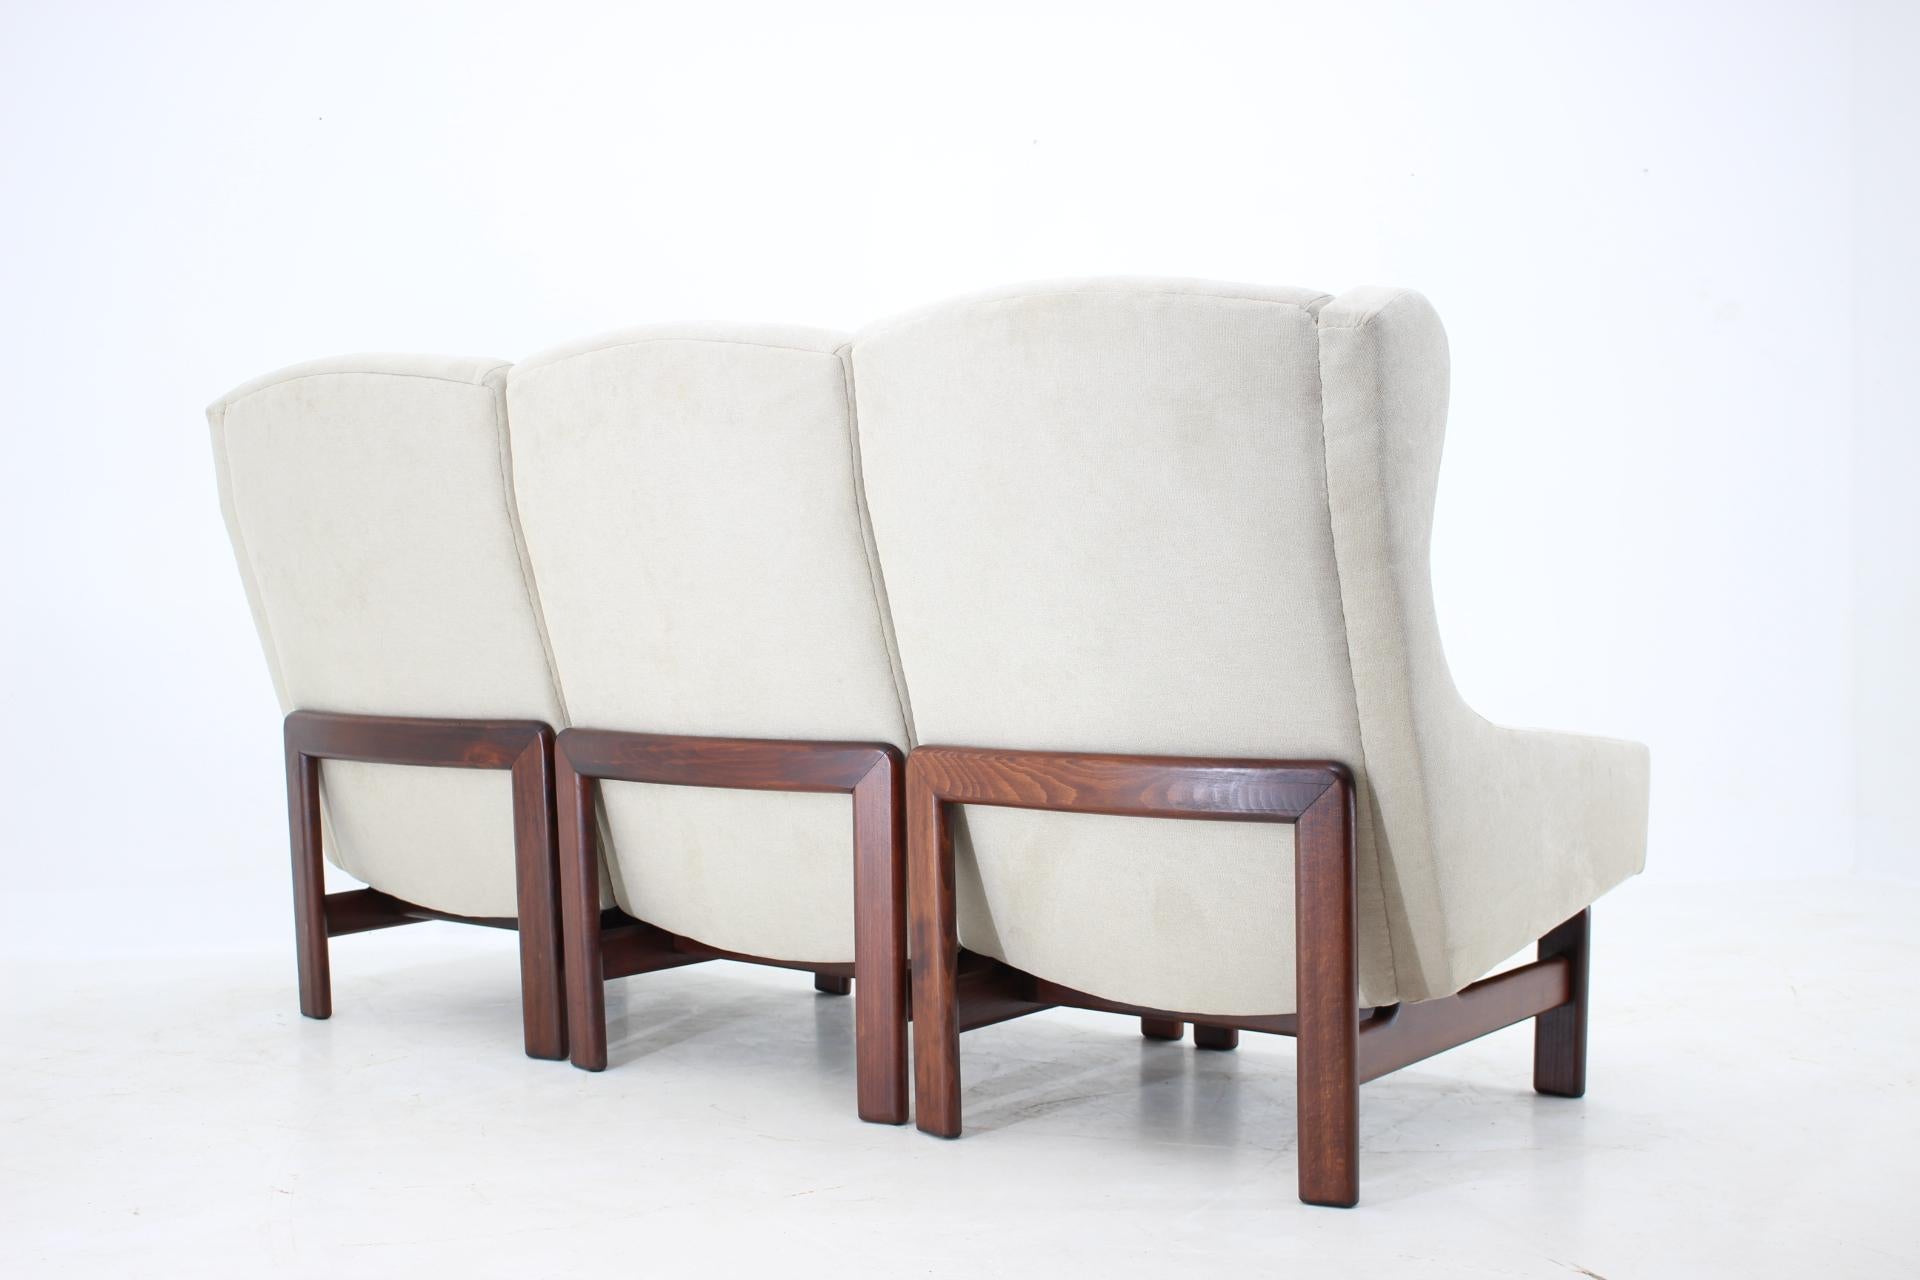 - Newly reupholstered 
- The beech wooden frames has been refurbished
- Hight of seat 36cm.